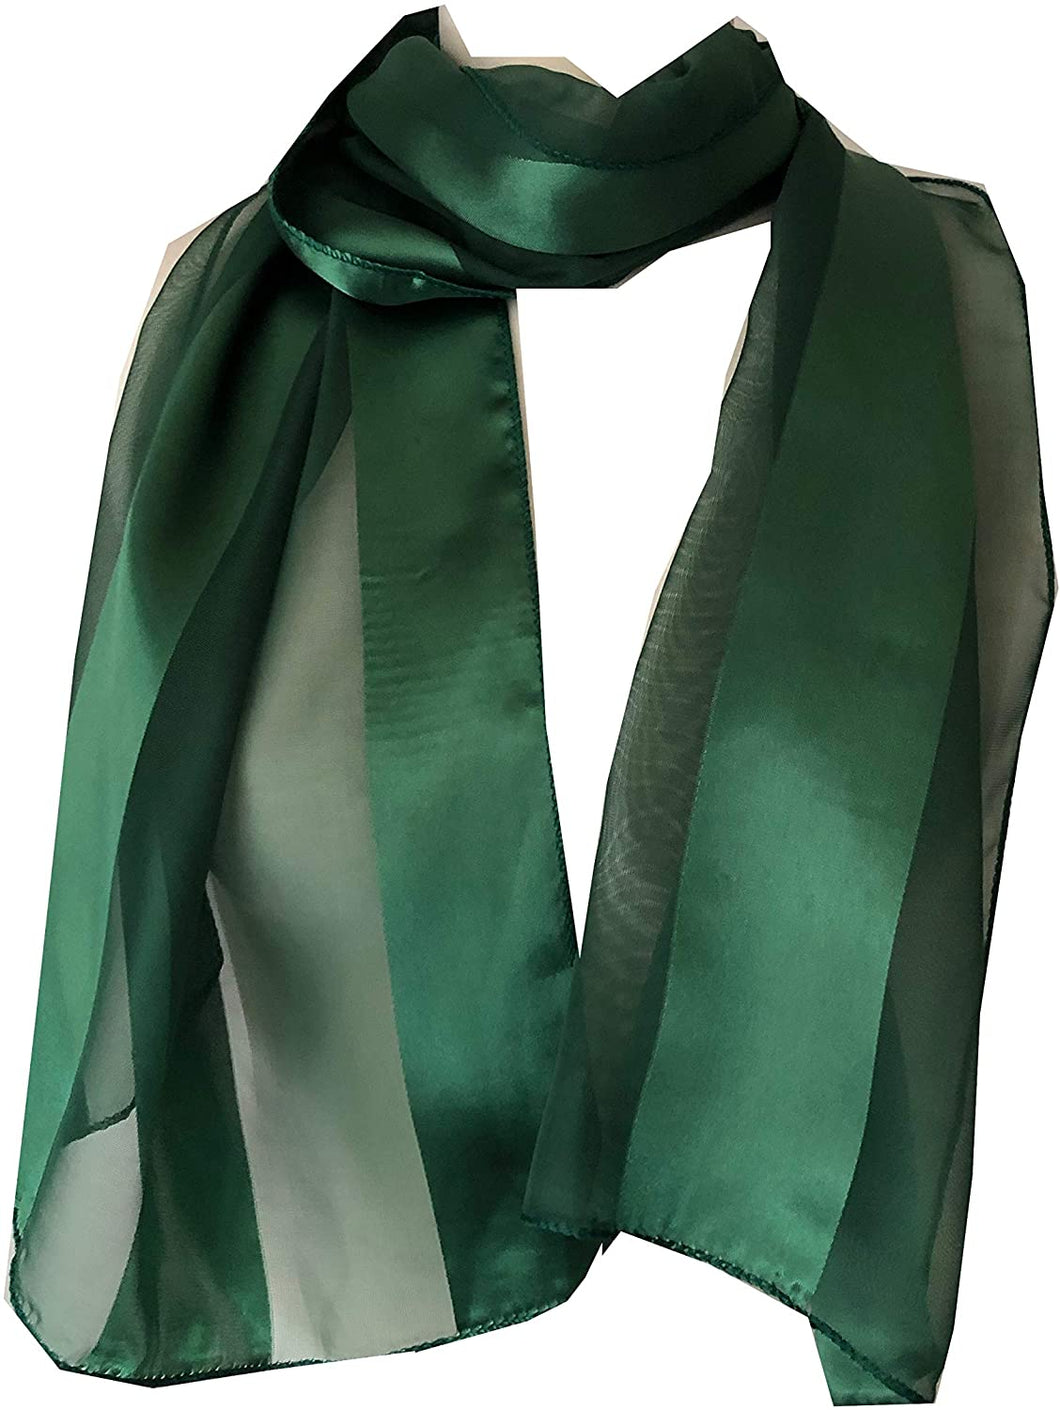 Plain Green Faux Chiffon and Satin Style Striped Scarf Thin Pretty Scarf Great for Any Outfit Lovely Gift